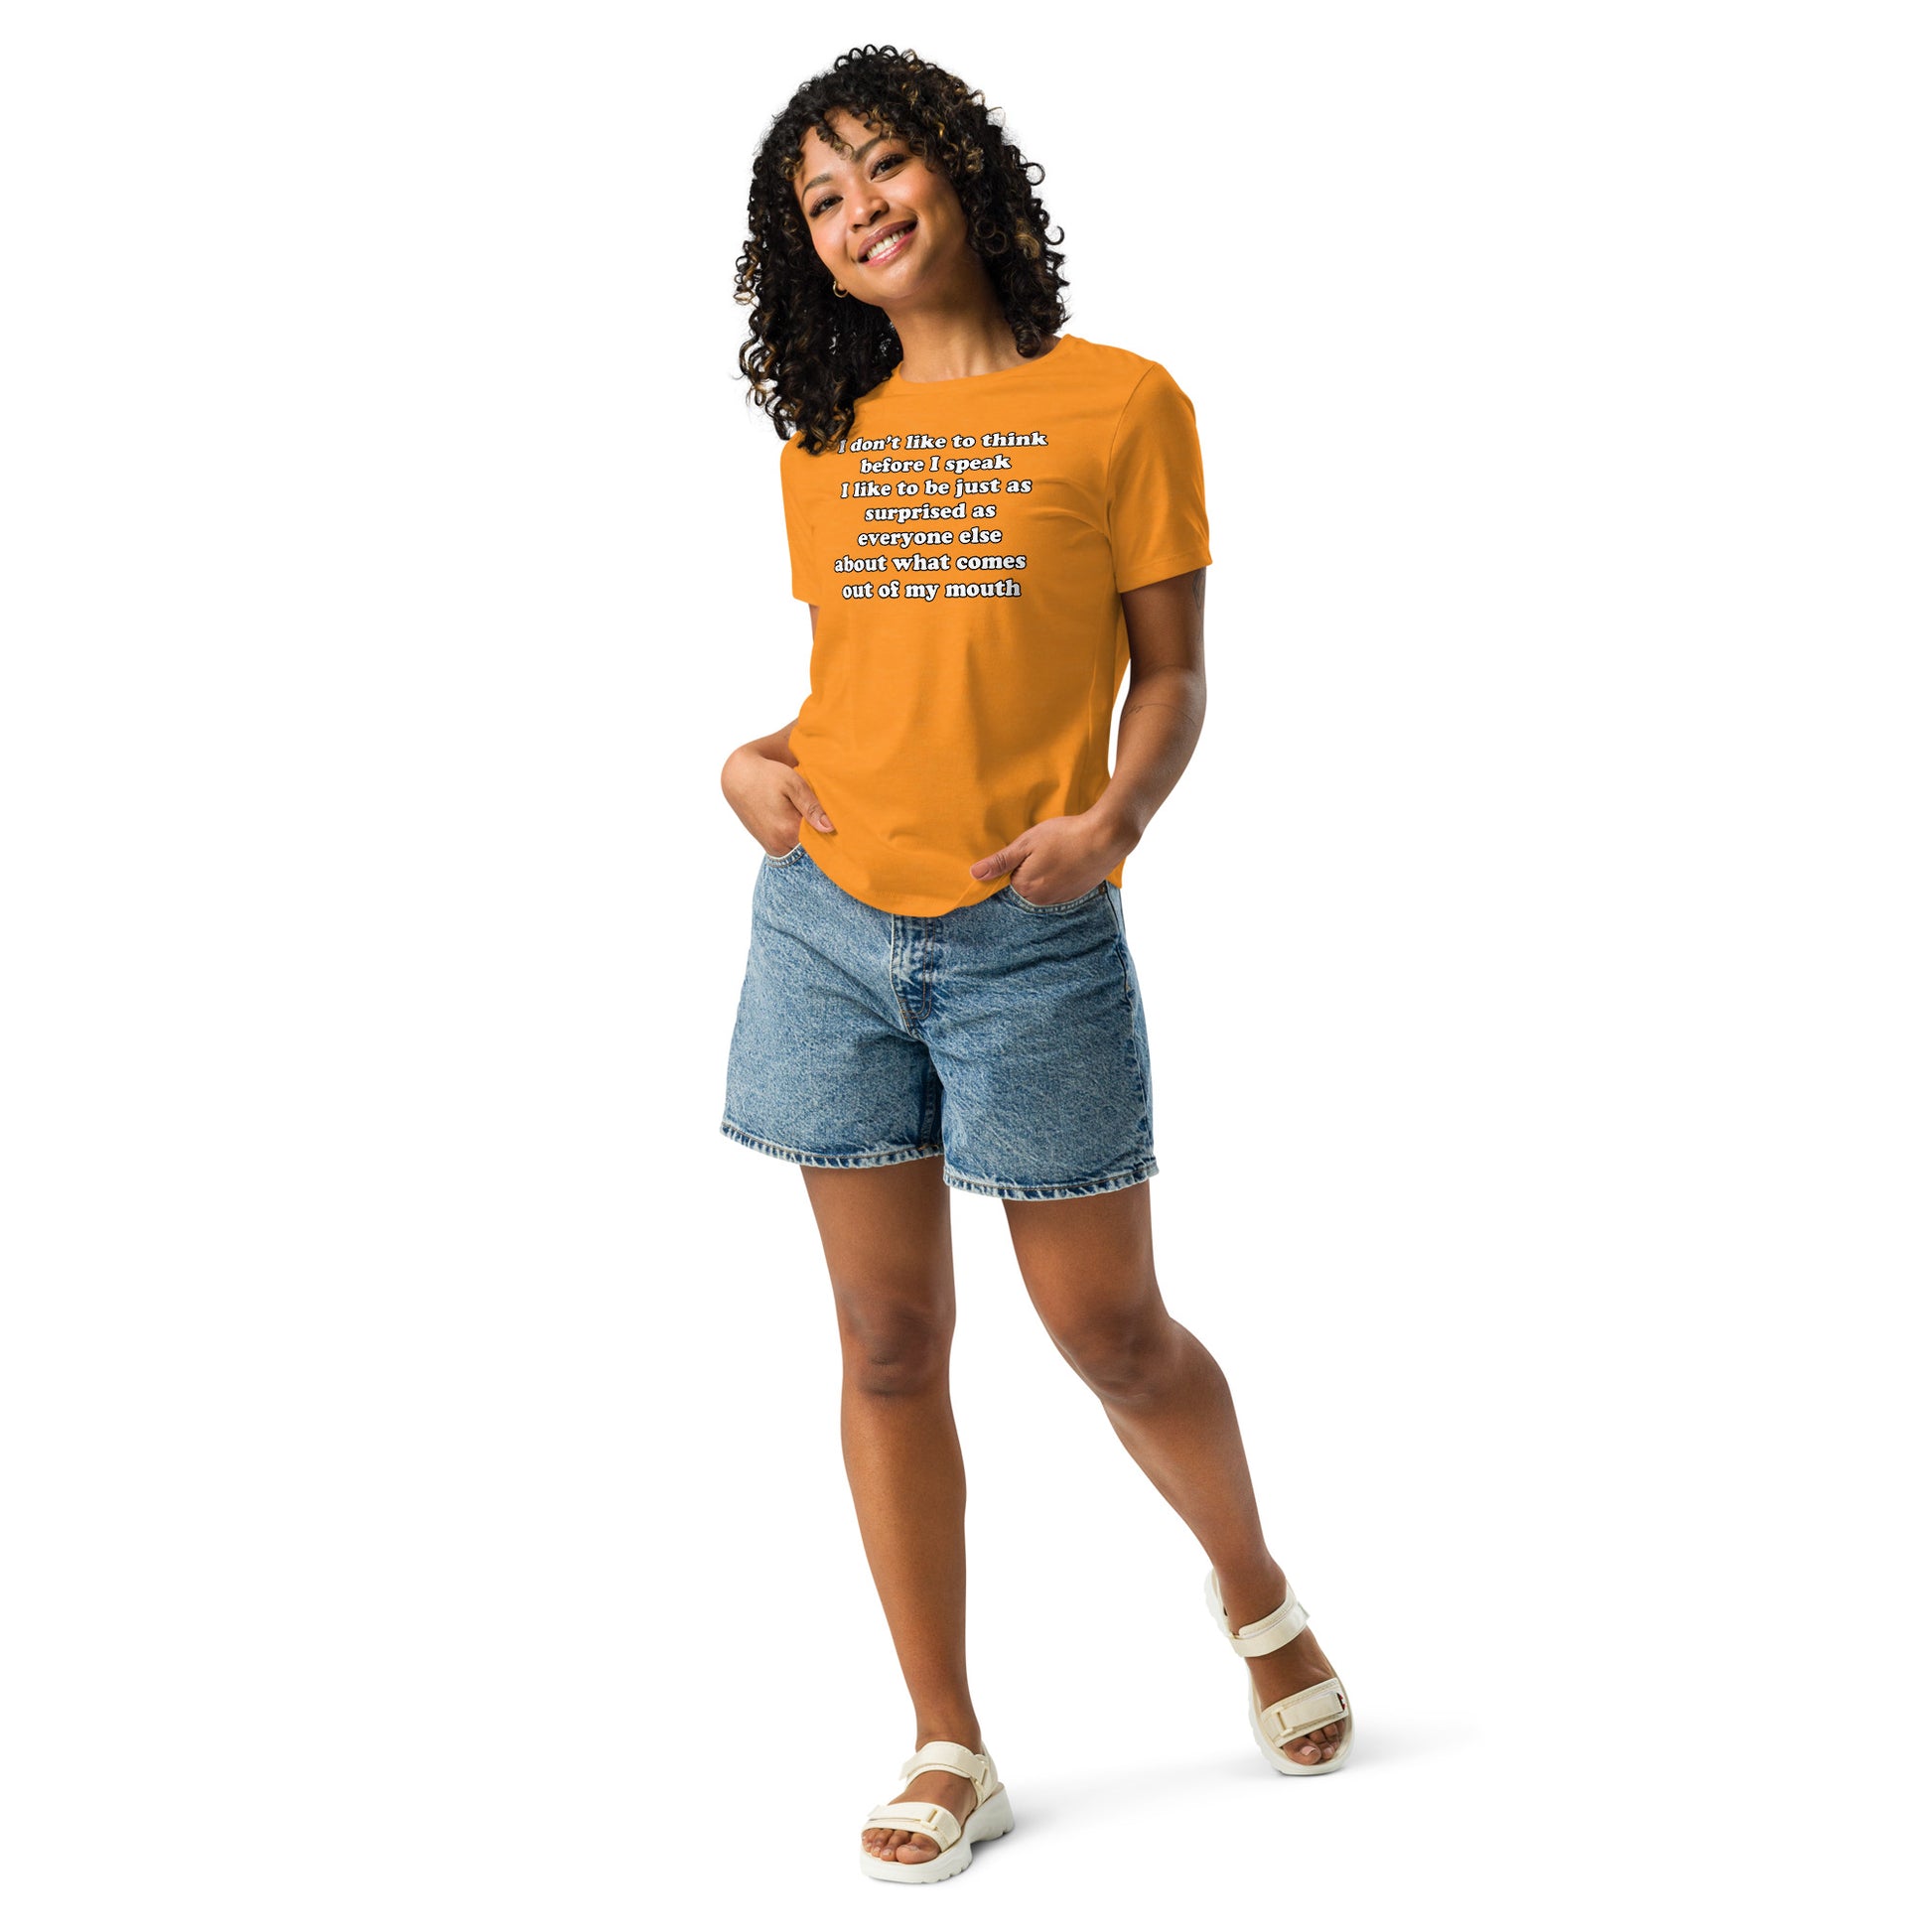 Woman with marmalade t-shirt with text “I don't think before I speak Just as serprised as everyone about what comes out of my mouth"